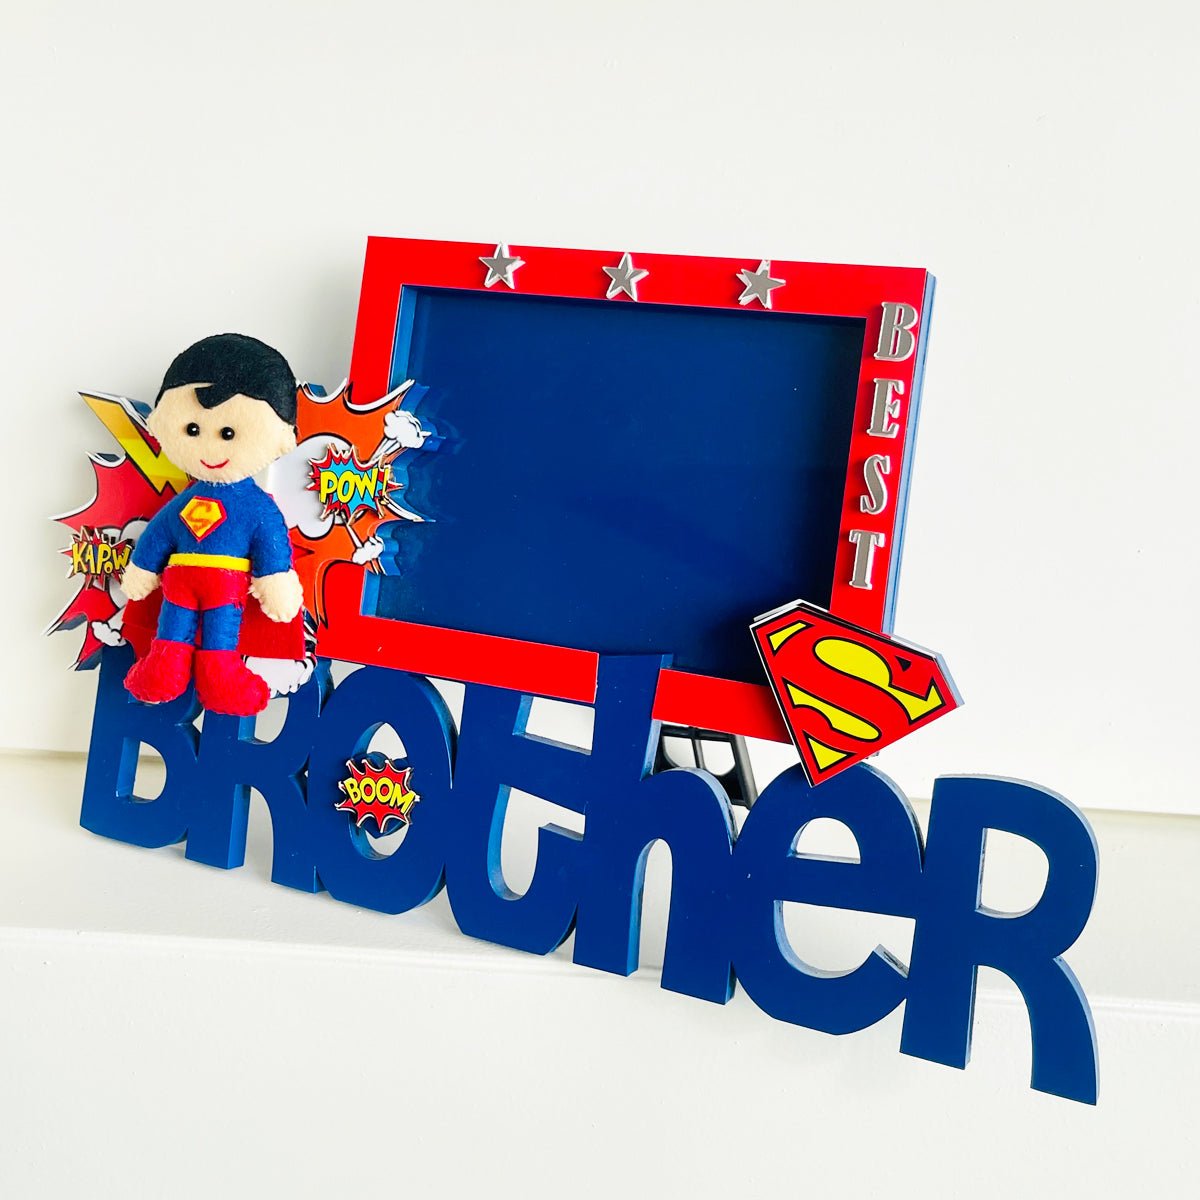 Best Brother Photo Frame - Little Surprise BoxBest Brother Photo Frame